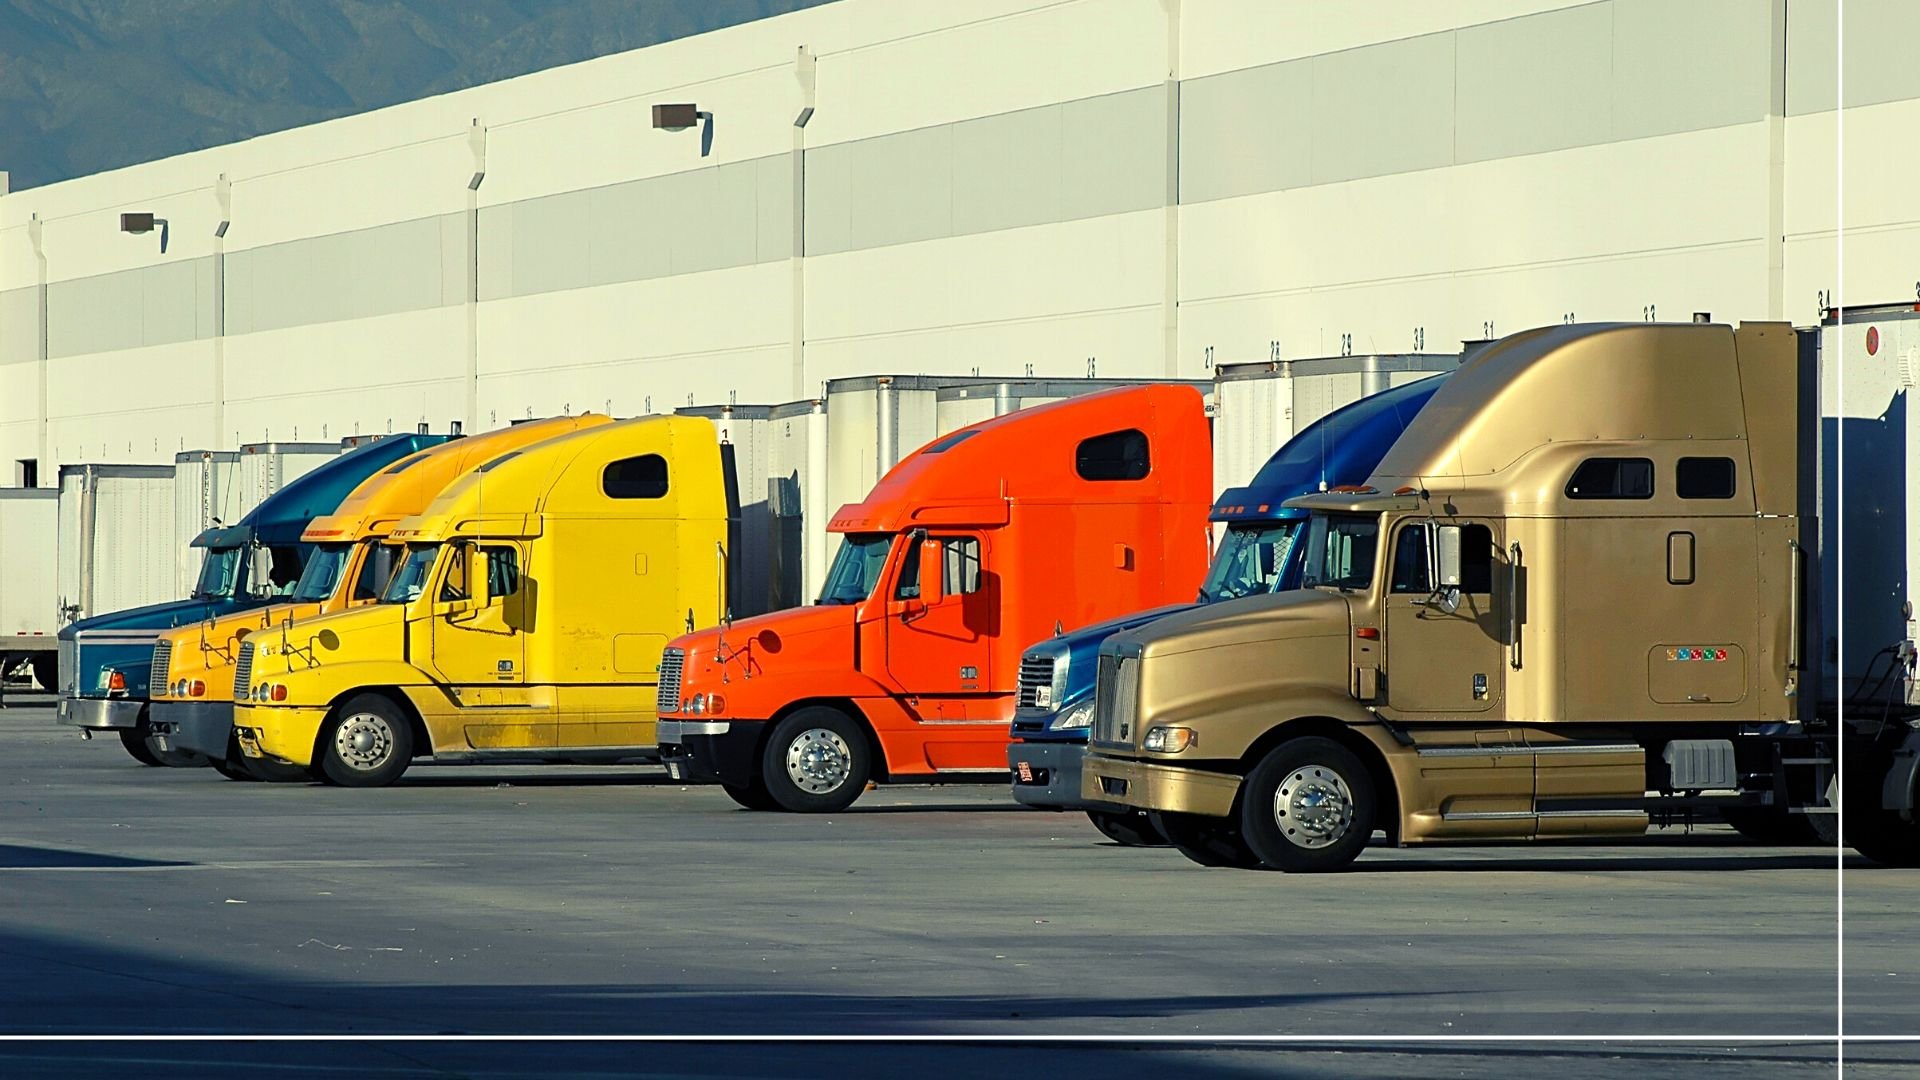 trucking parking your trailer load into tight spots usa and canada us